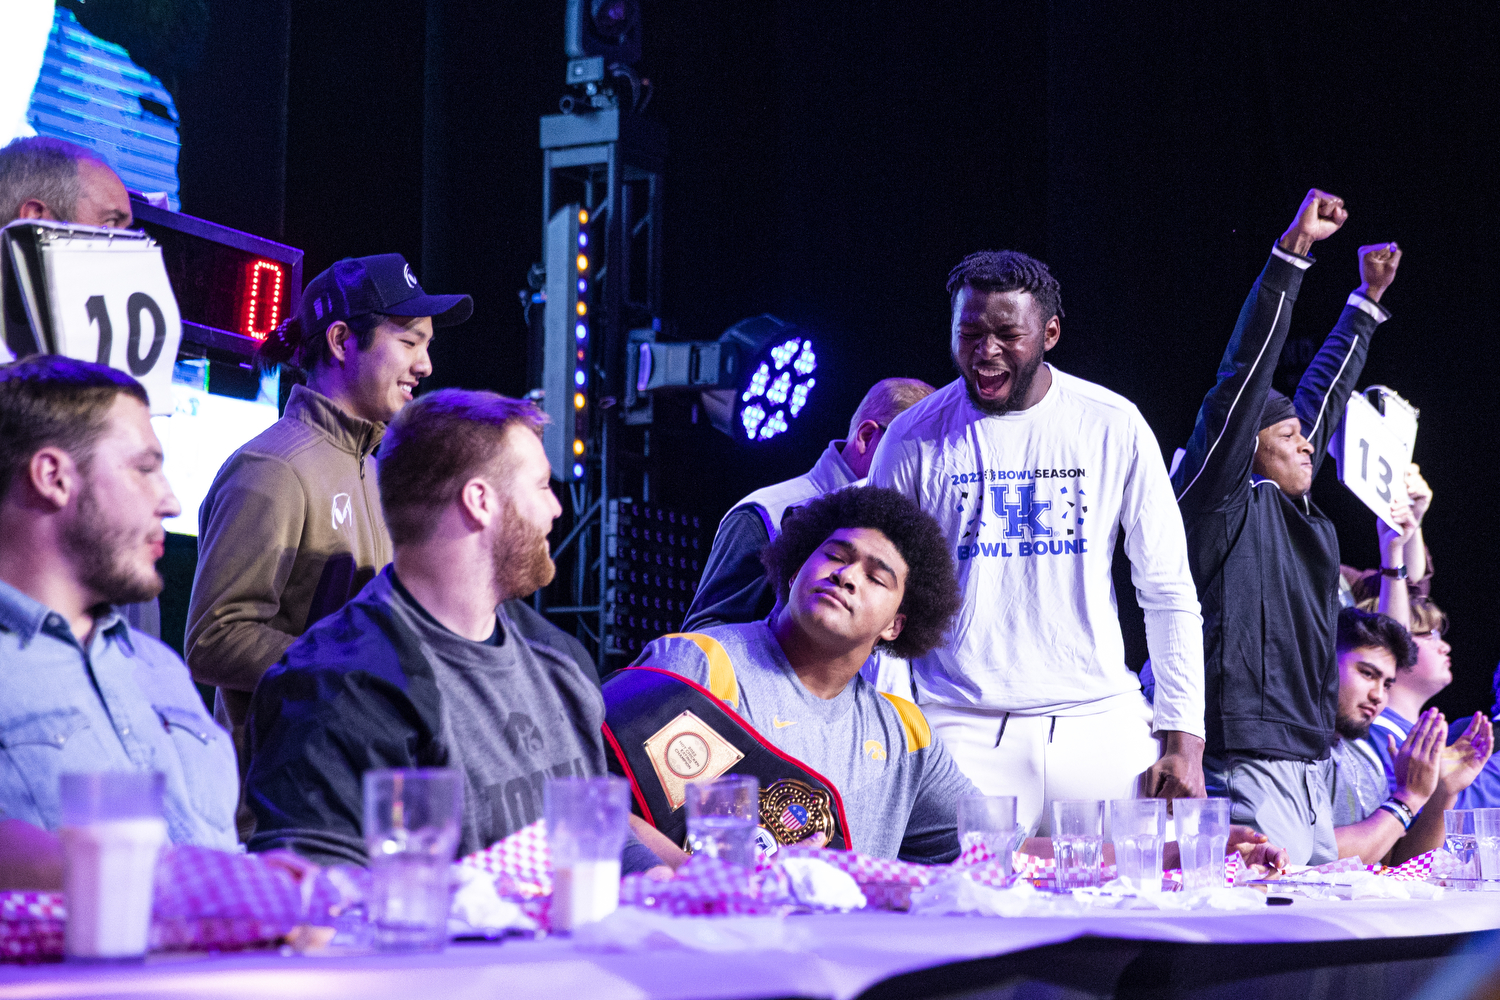 Consolation prize? Kentucky defeated Iowa in a wing eating contest at a welcome party ahead of the Music City Bowl